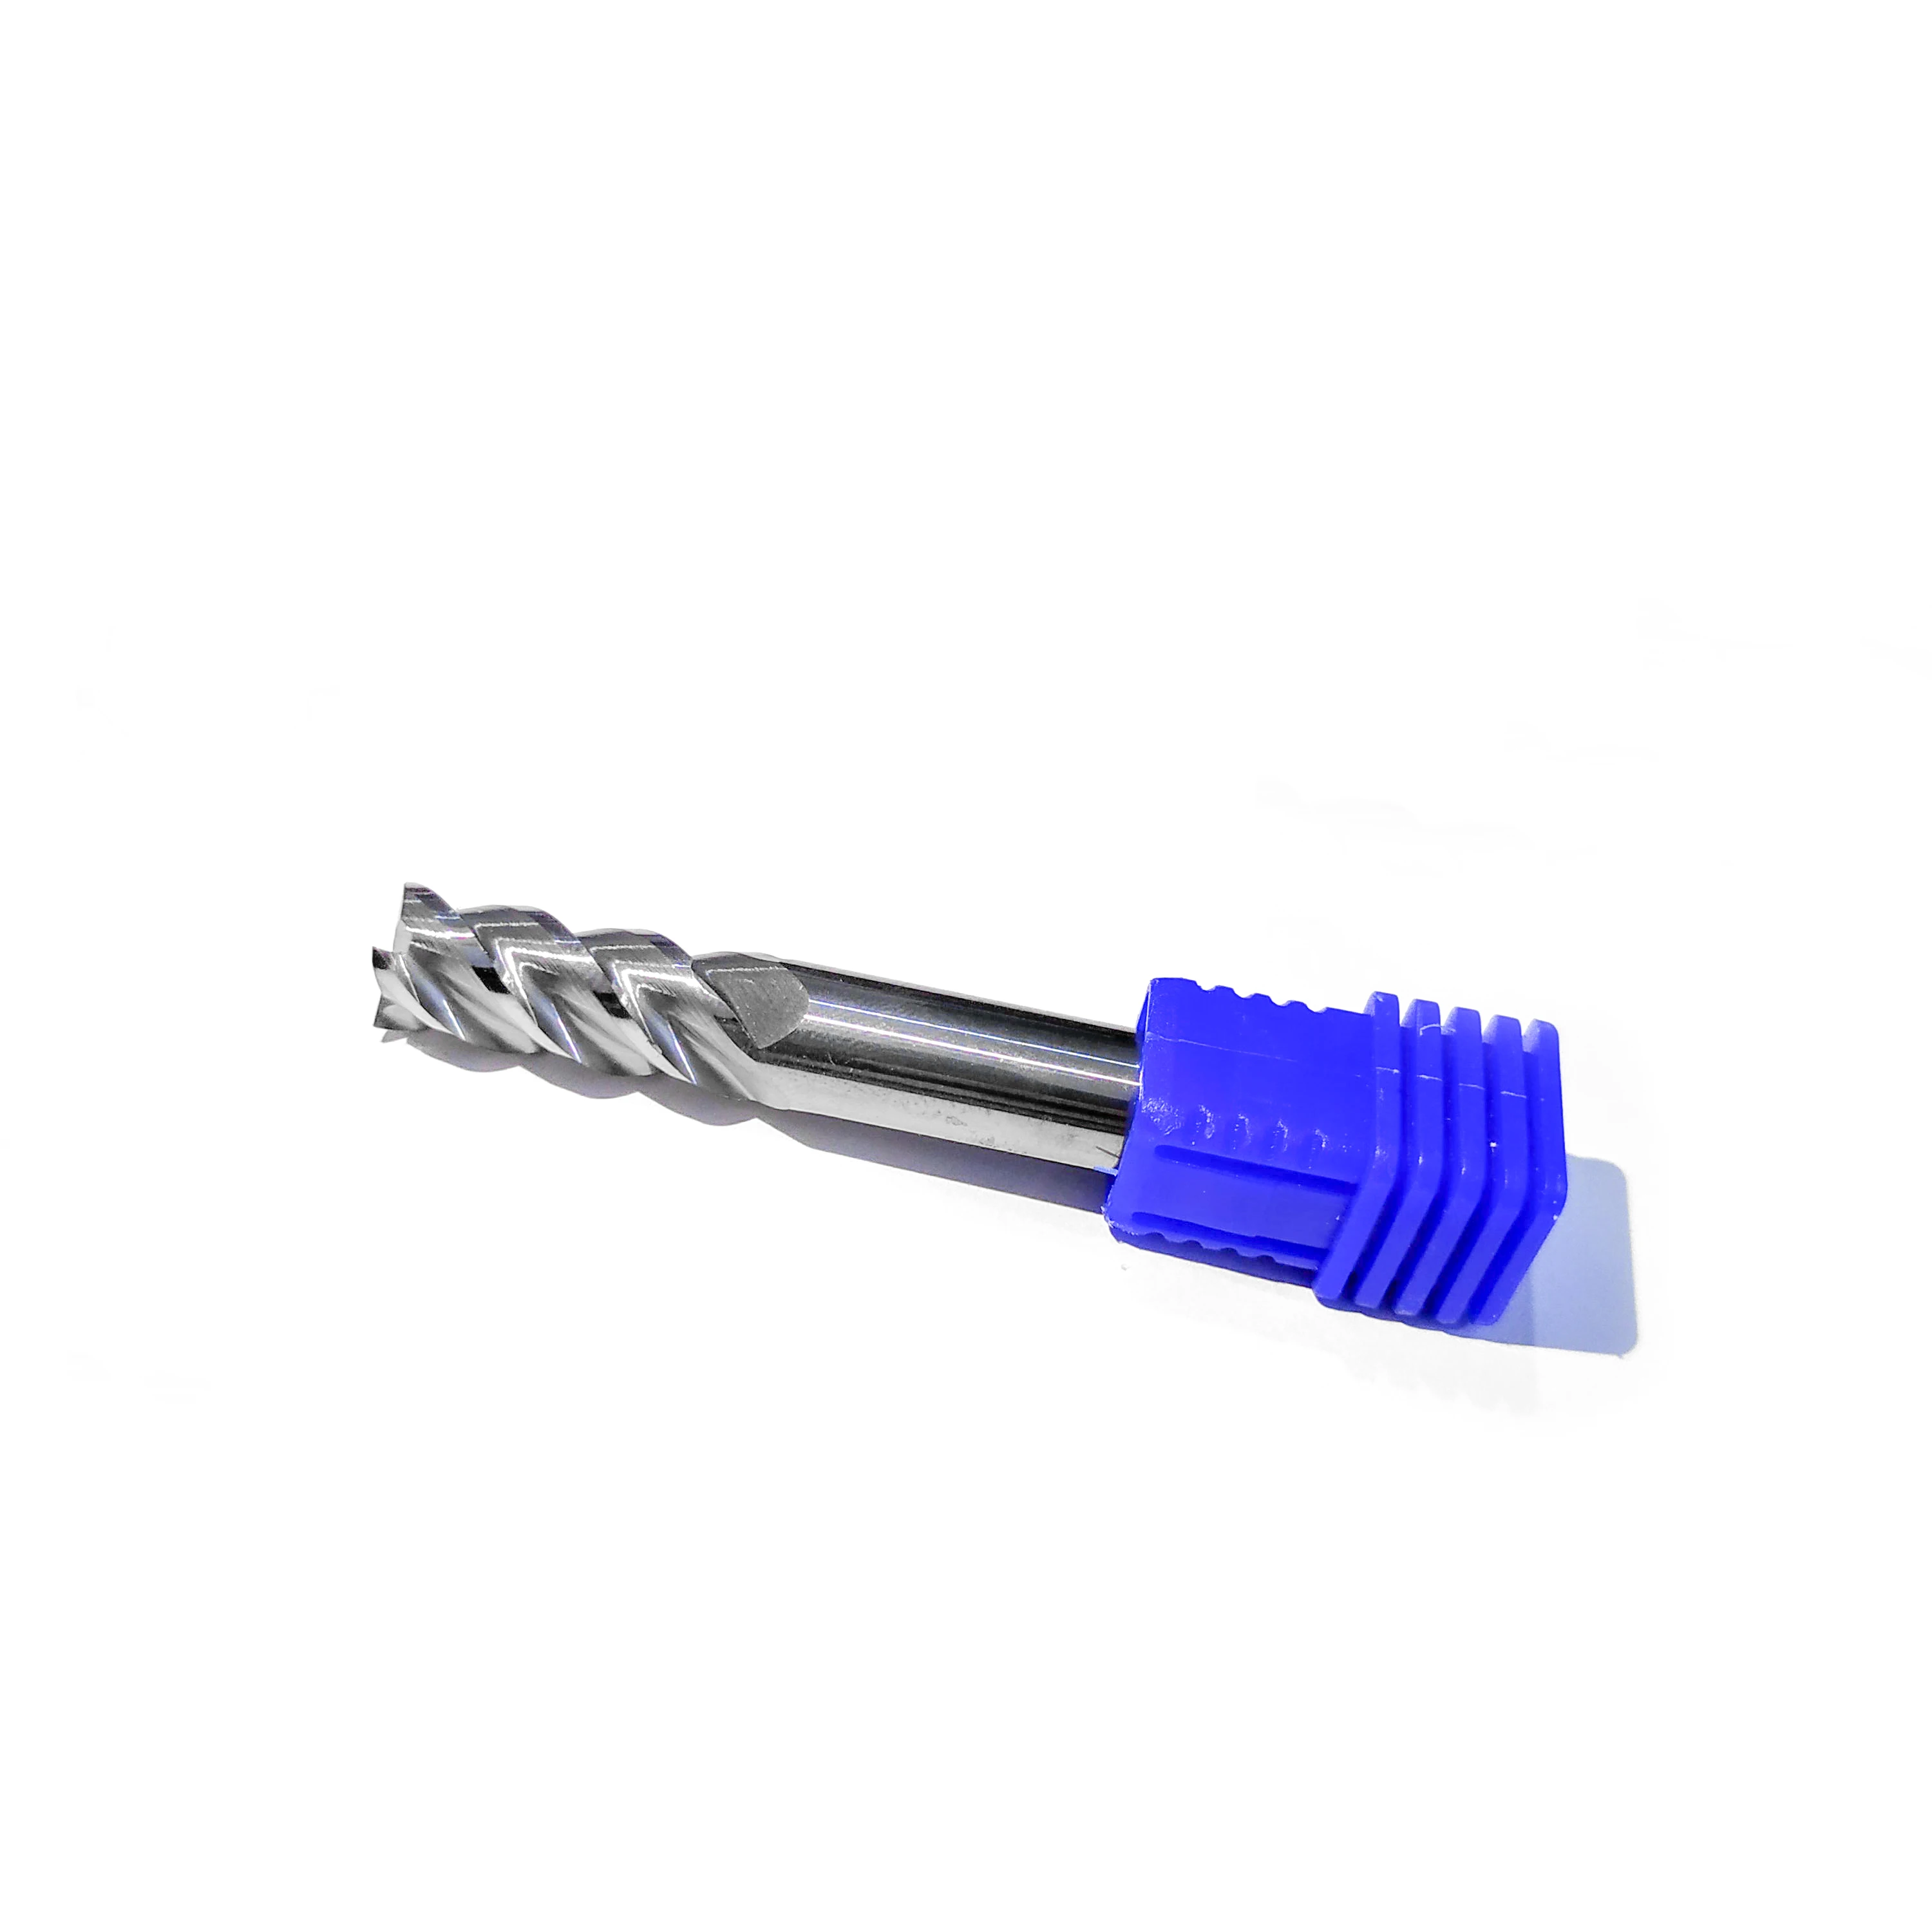 HRC45 4 Flute Carbide 12mm End Mill Cutting Tools for Aluminum